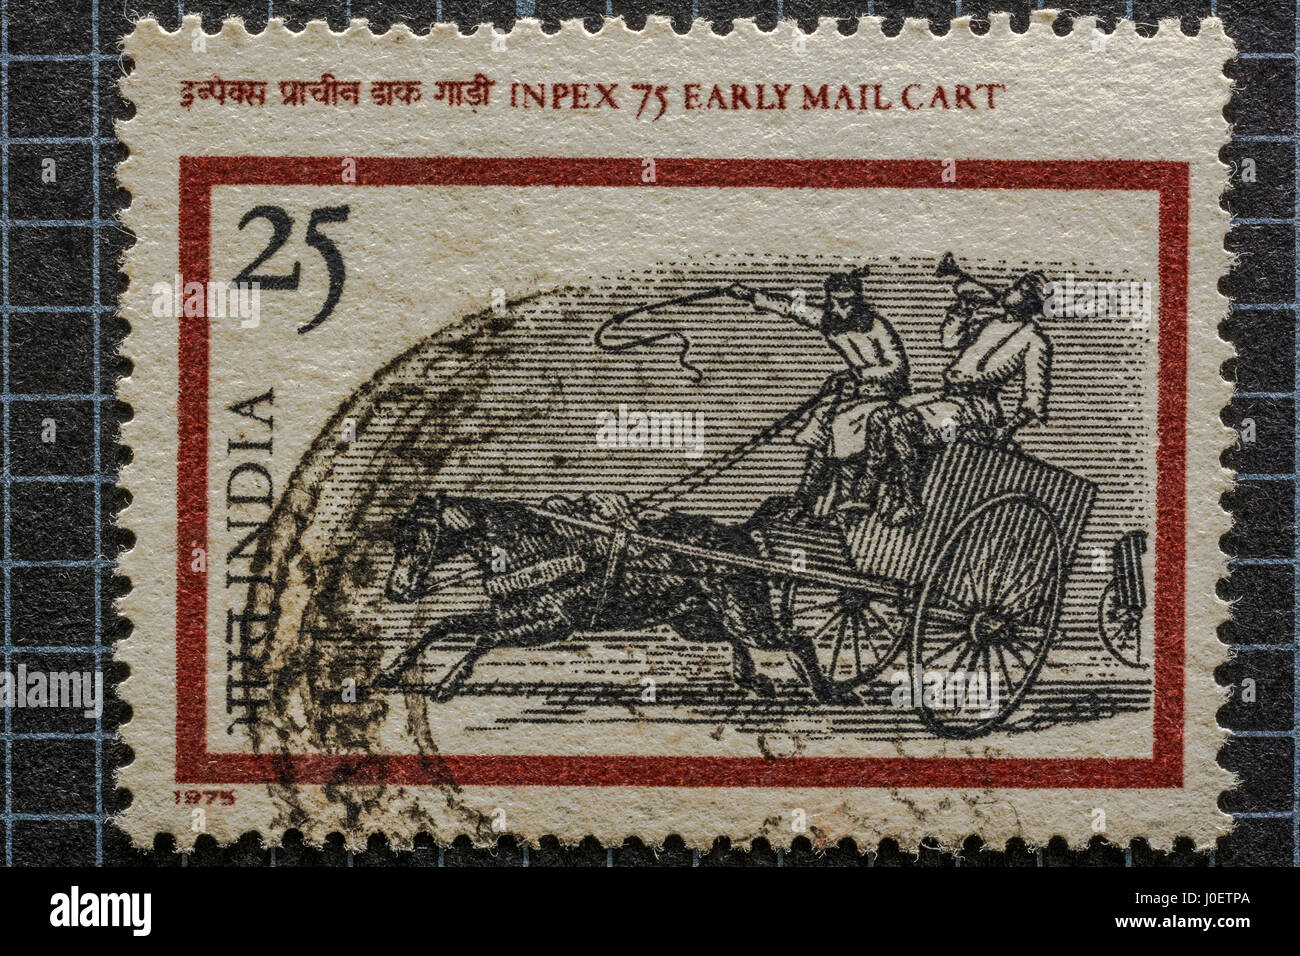 Transport inpex 75 early mail cart, postage stamps, india, asia Stock Photo